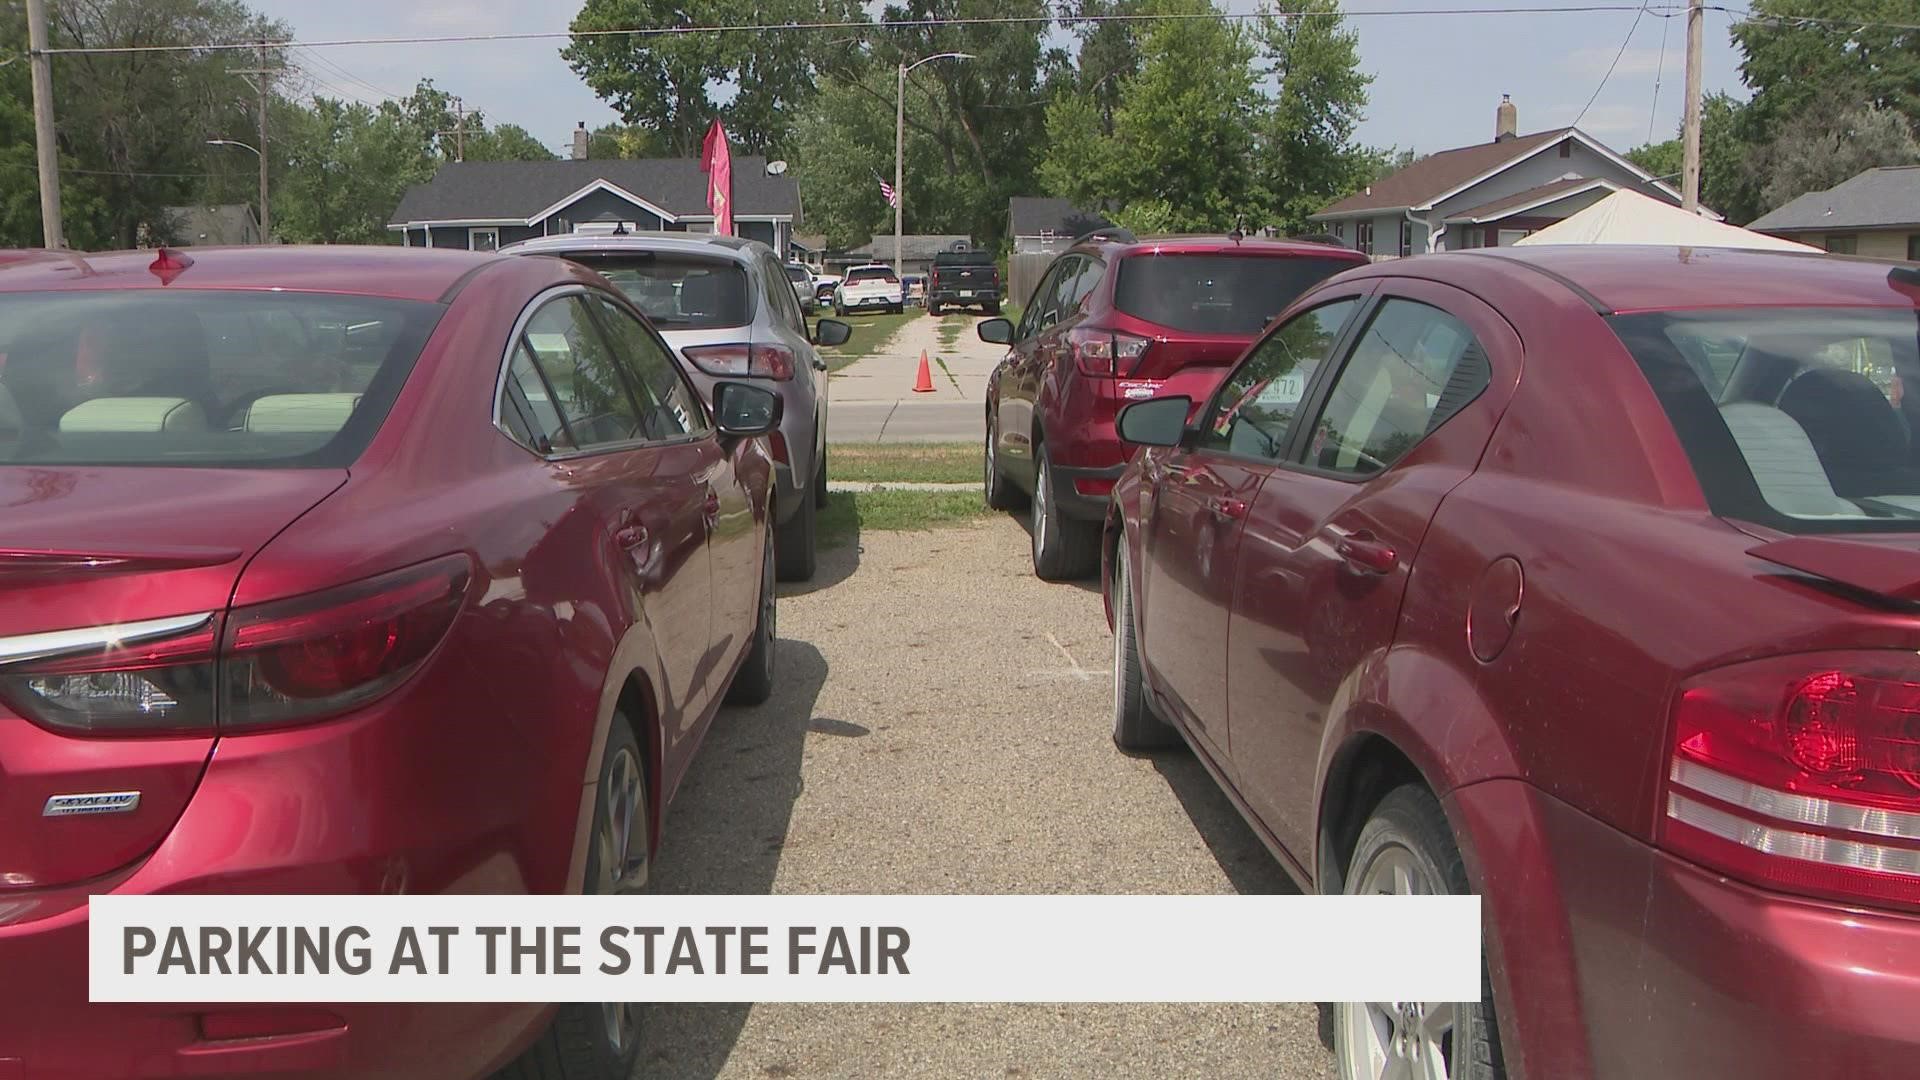 Many 'yard parking entrepreneurs' allow fairgoers to park in their yards or driveways for a small price.